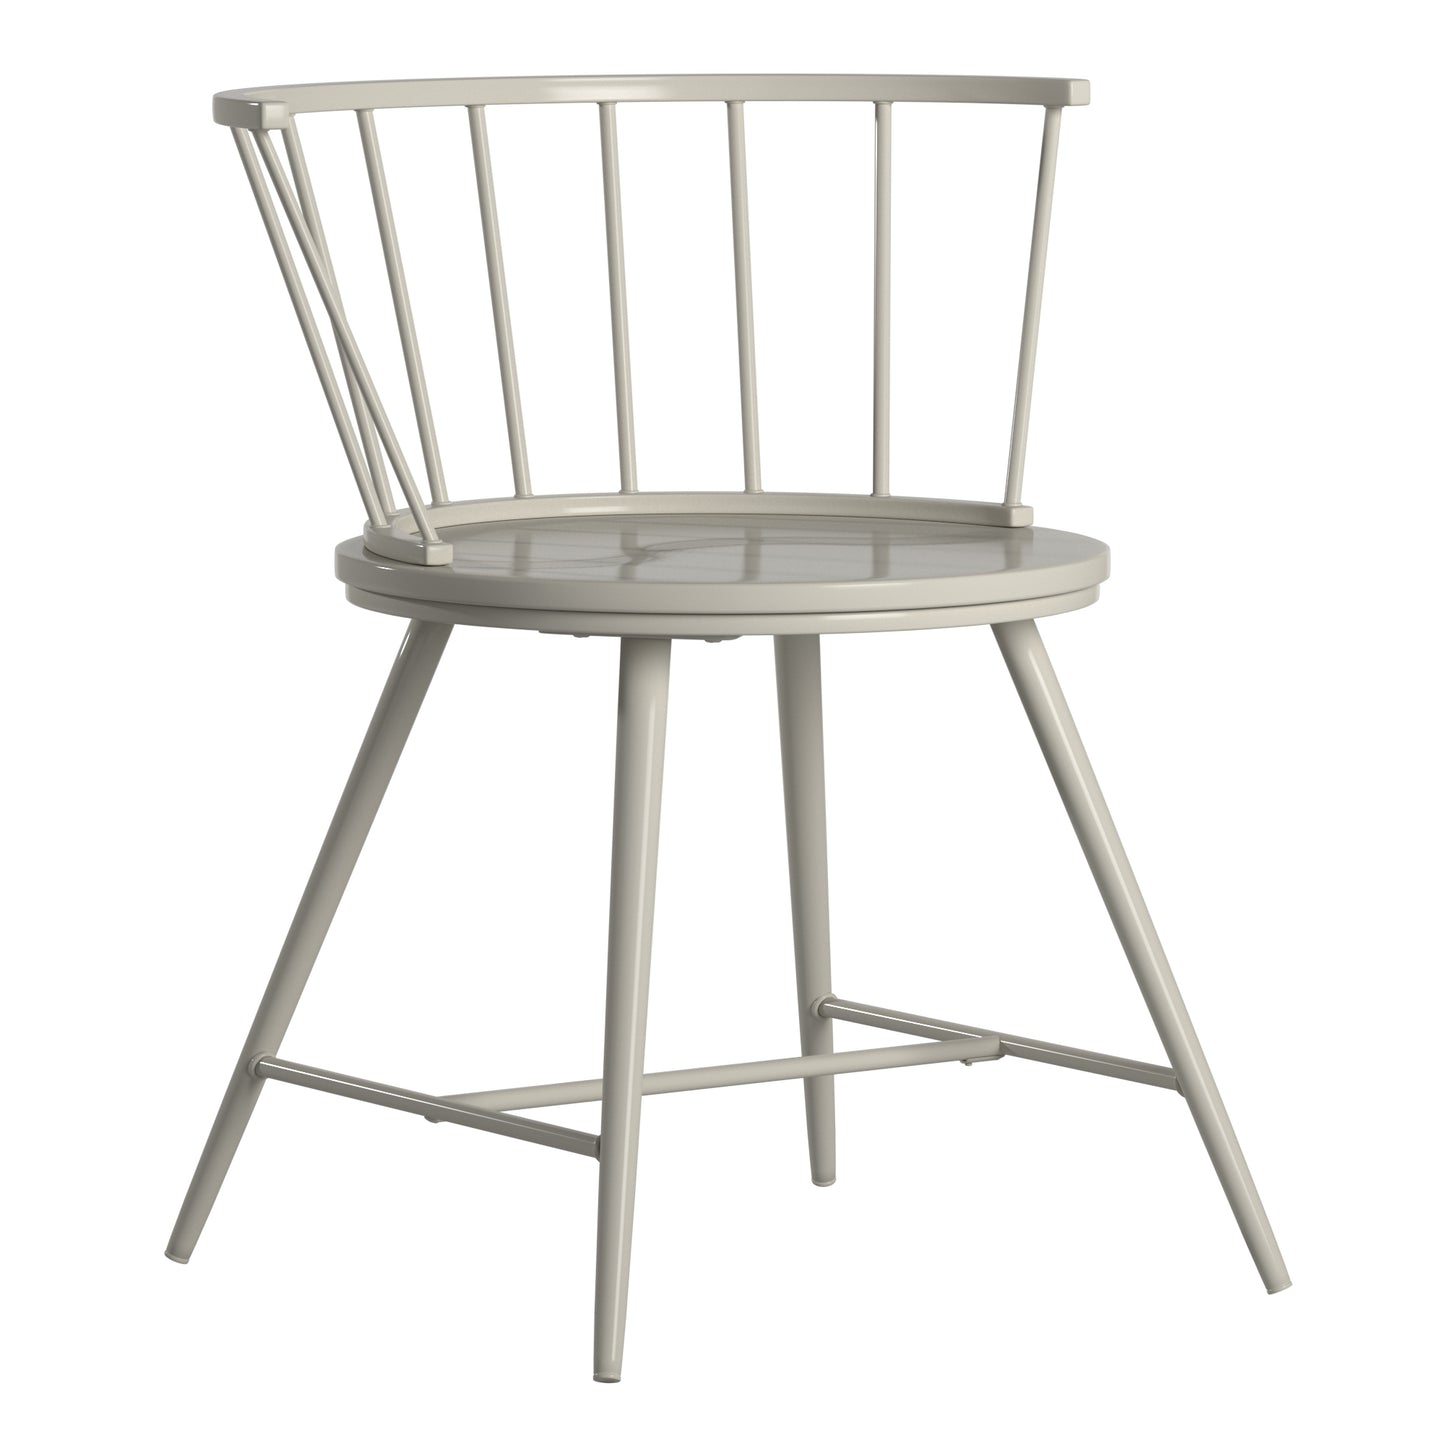 Low Back Windsor Classic Dining Chairs (Set of 2) - Silver Birch